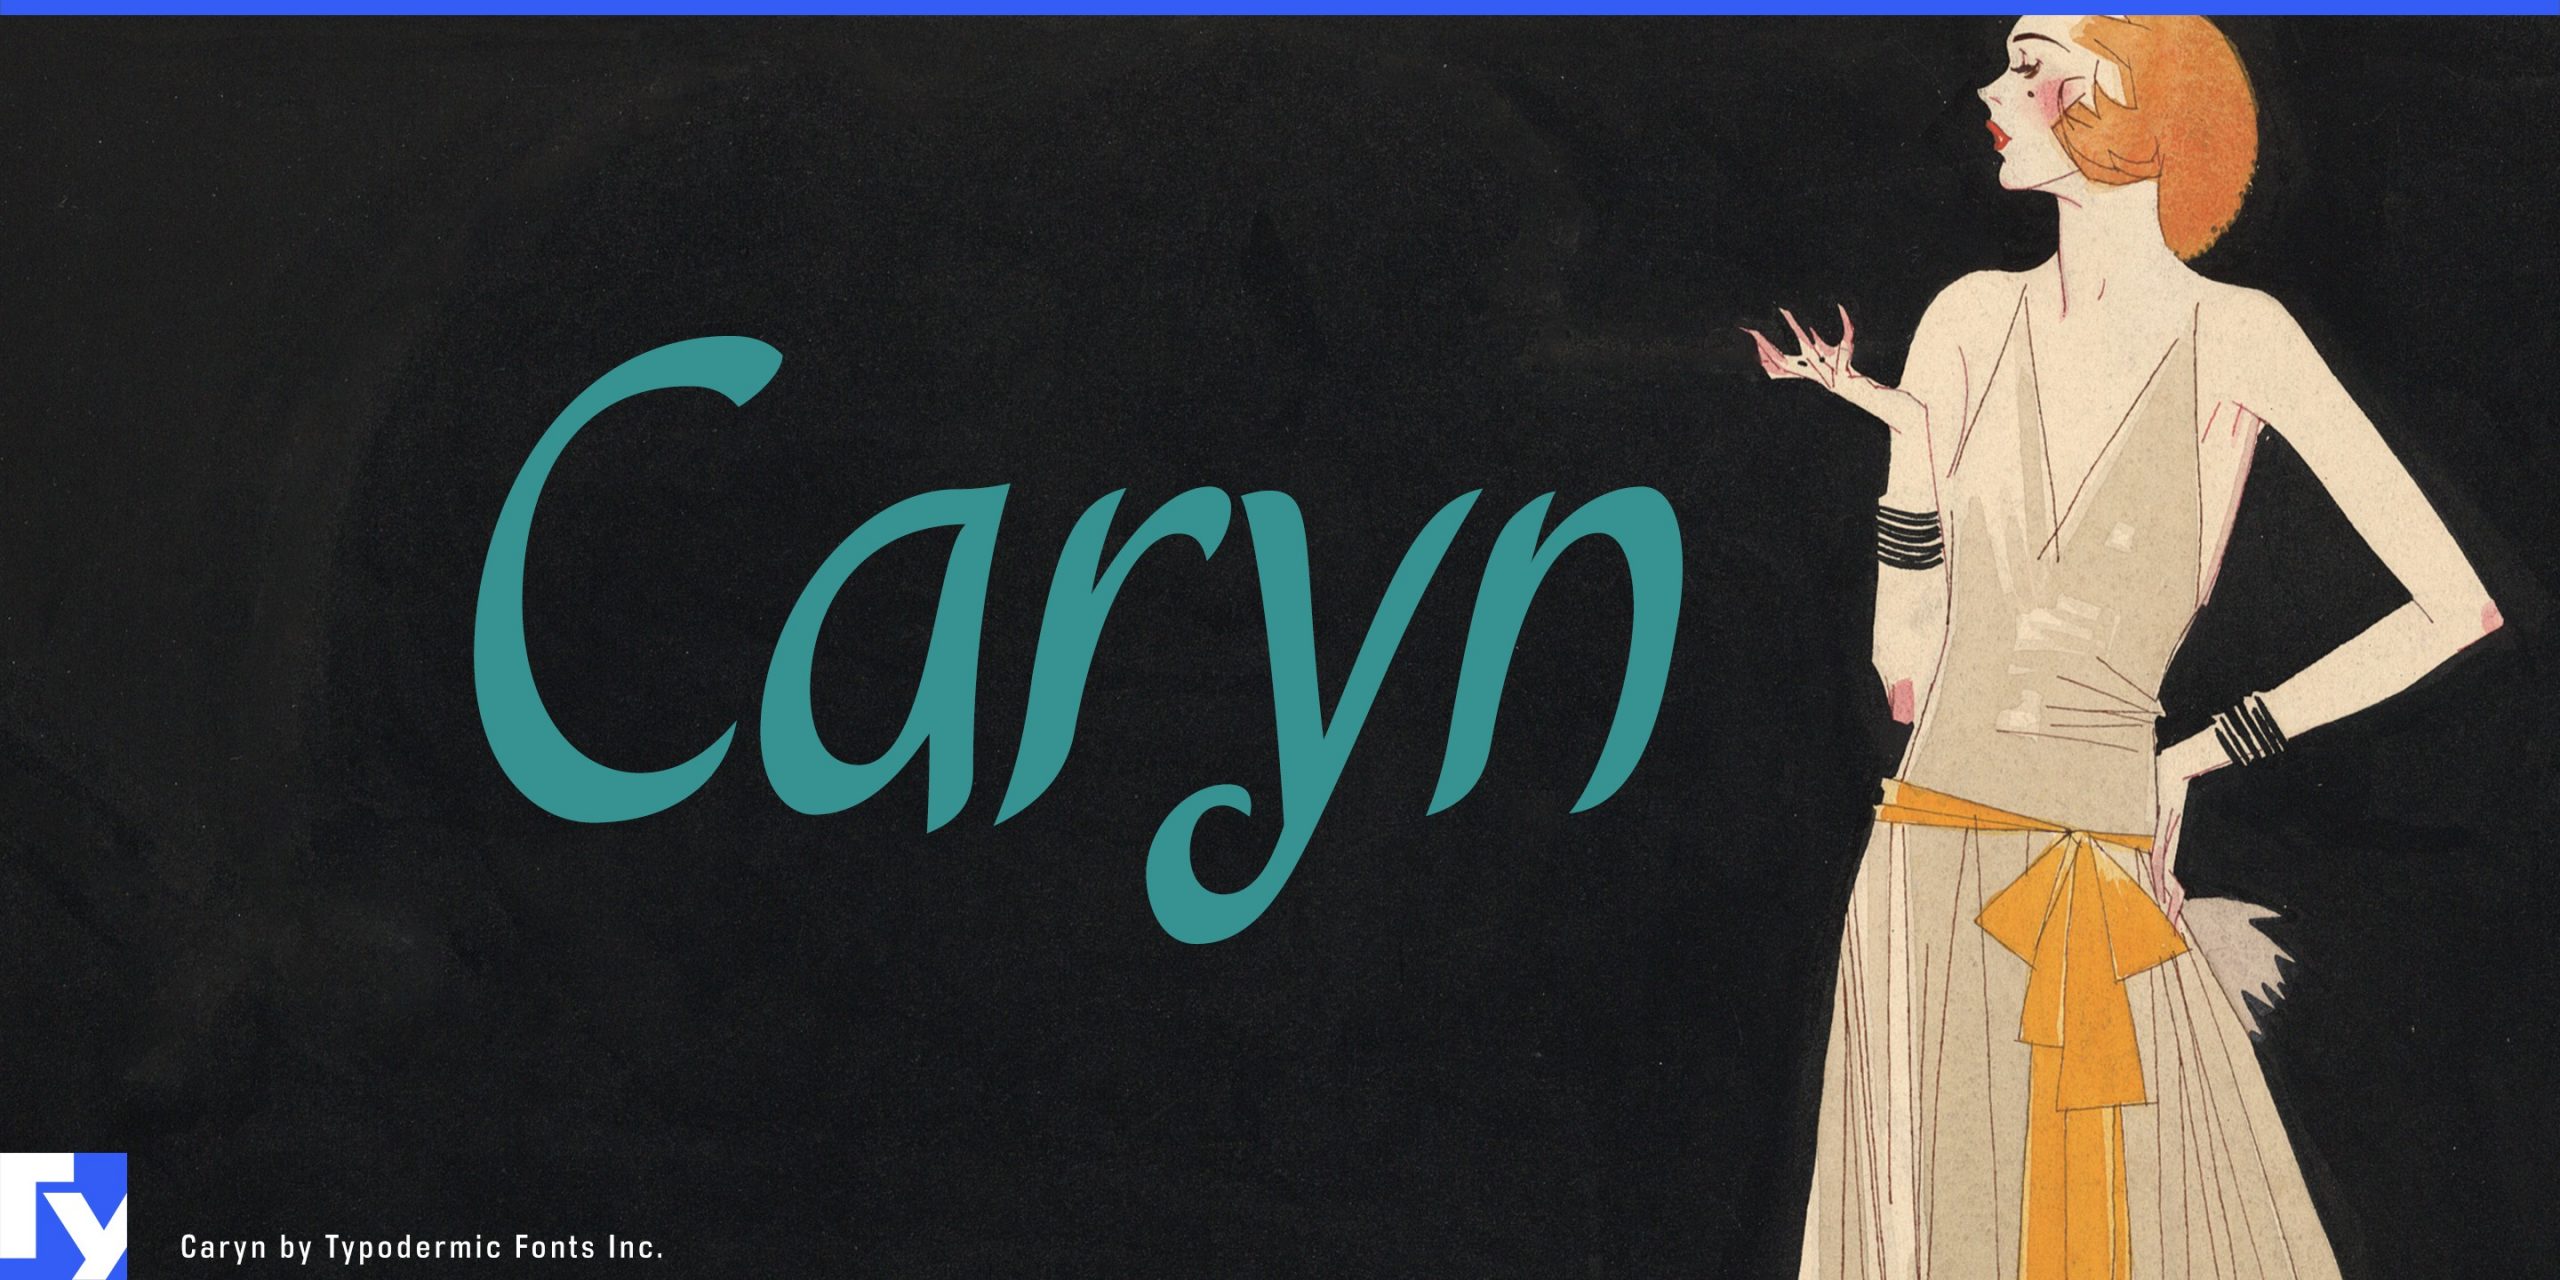 Genuine Warmth and Charm: Caryn Typeface Takes the Spotlight